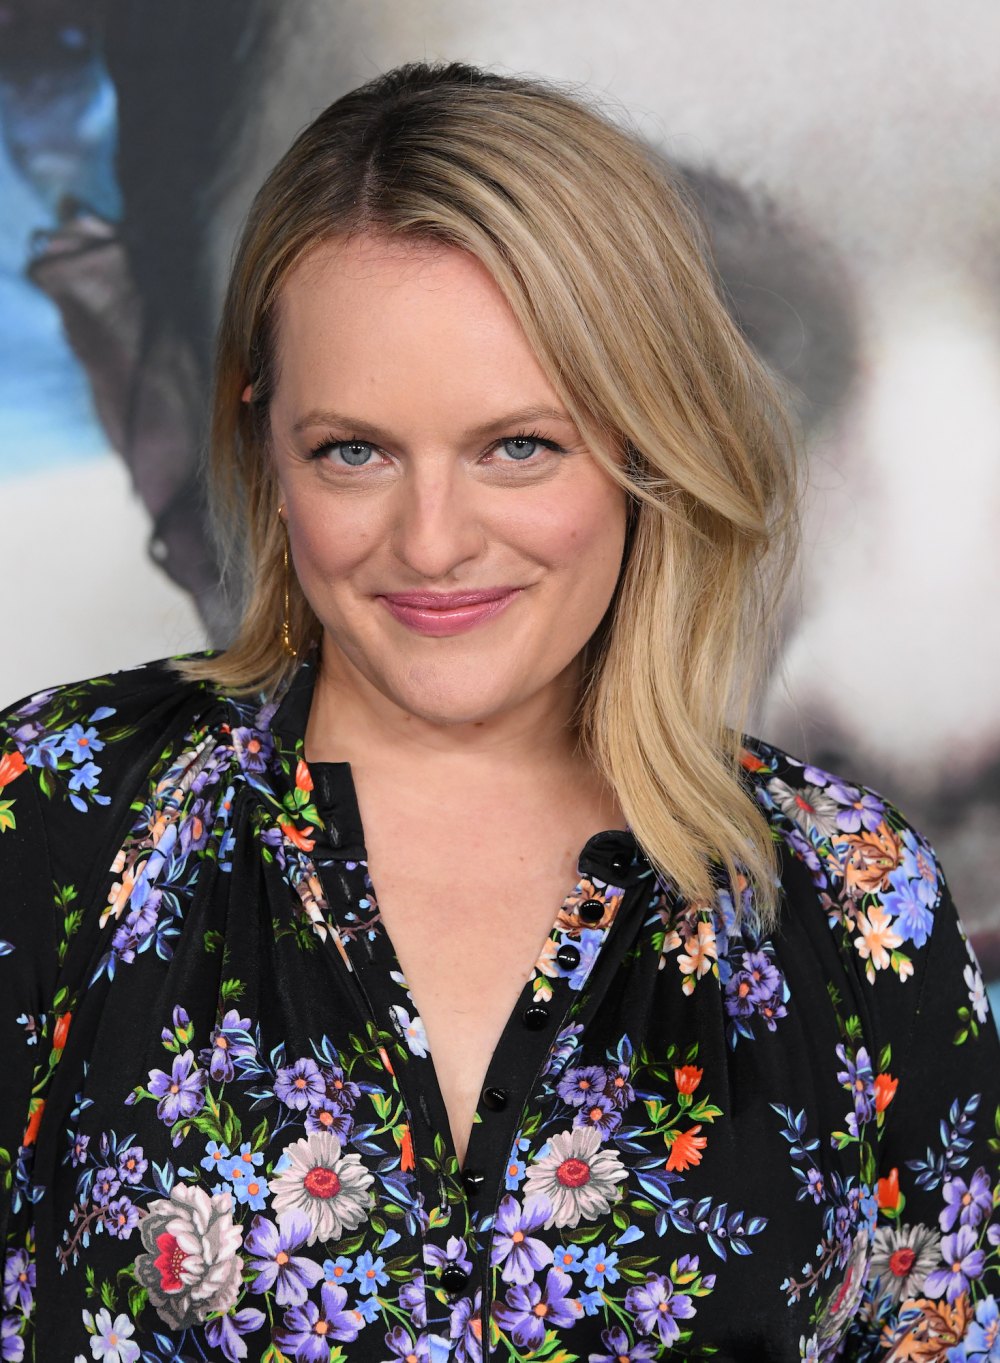 The Handmaid's Tale star Elisabeth Moss is pregnant and expecting baby No. 1